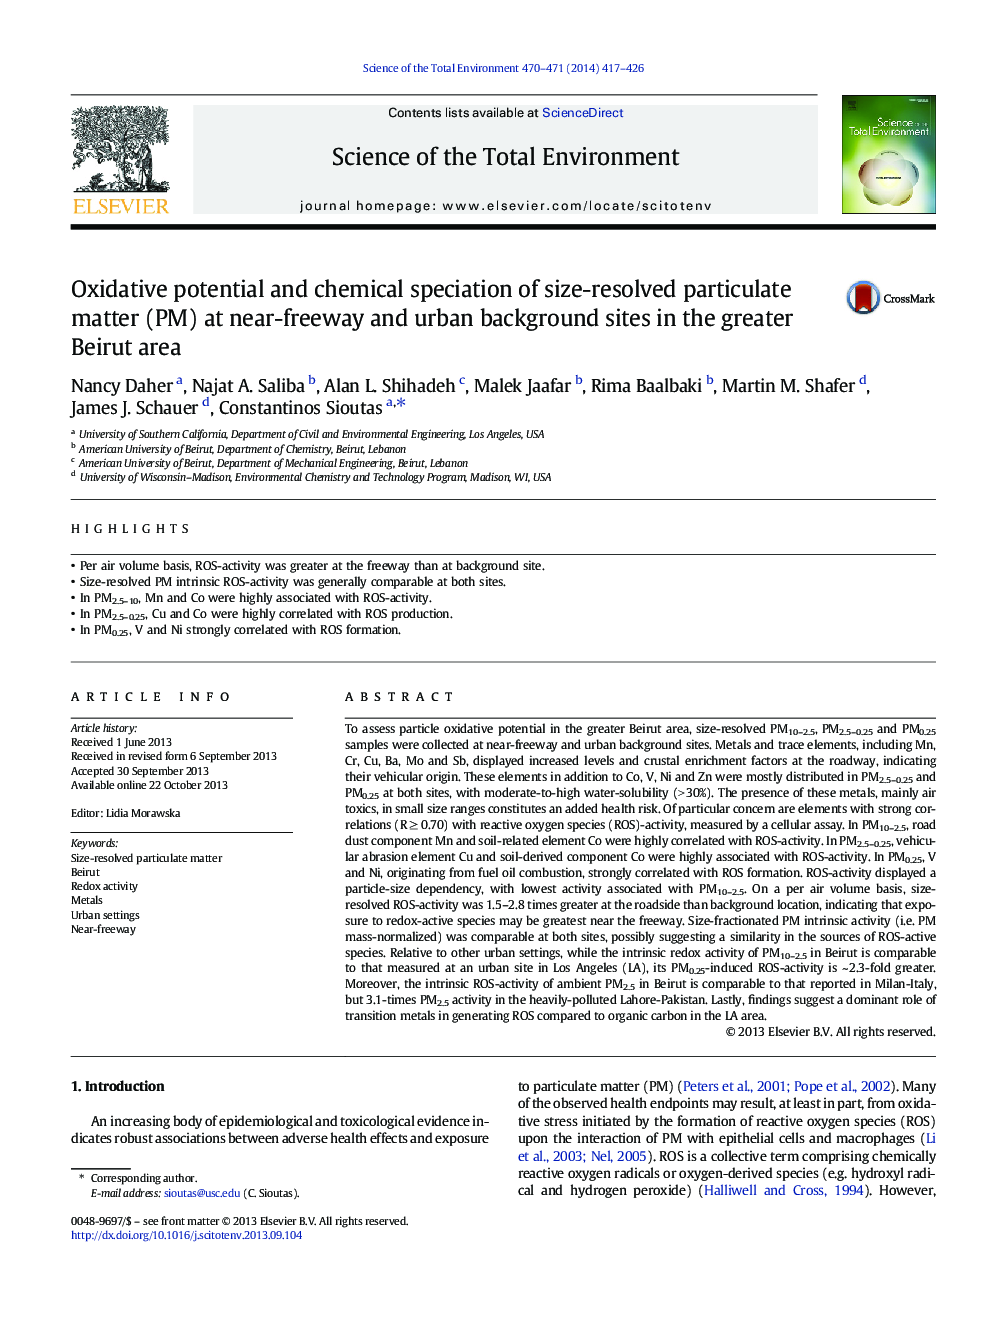 Oxidative potential and chemical speciation of size-resolved particulate matter (PM) at near-freeway and urban background sites in the greater Beirut area